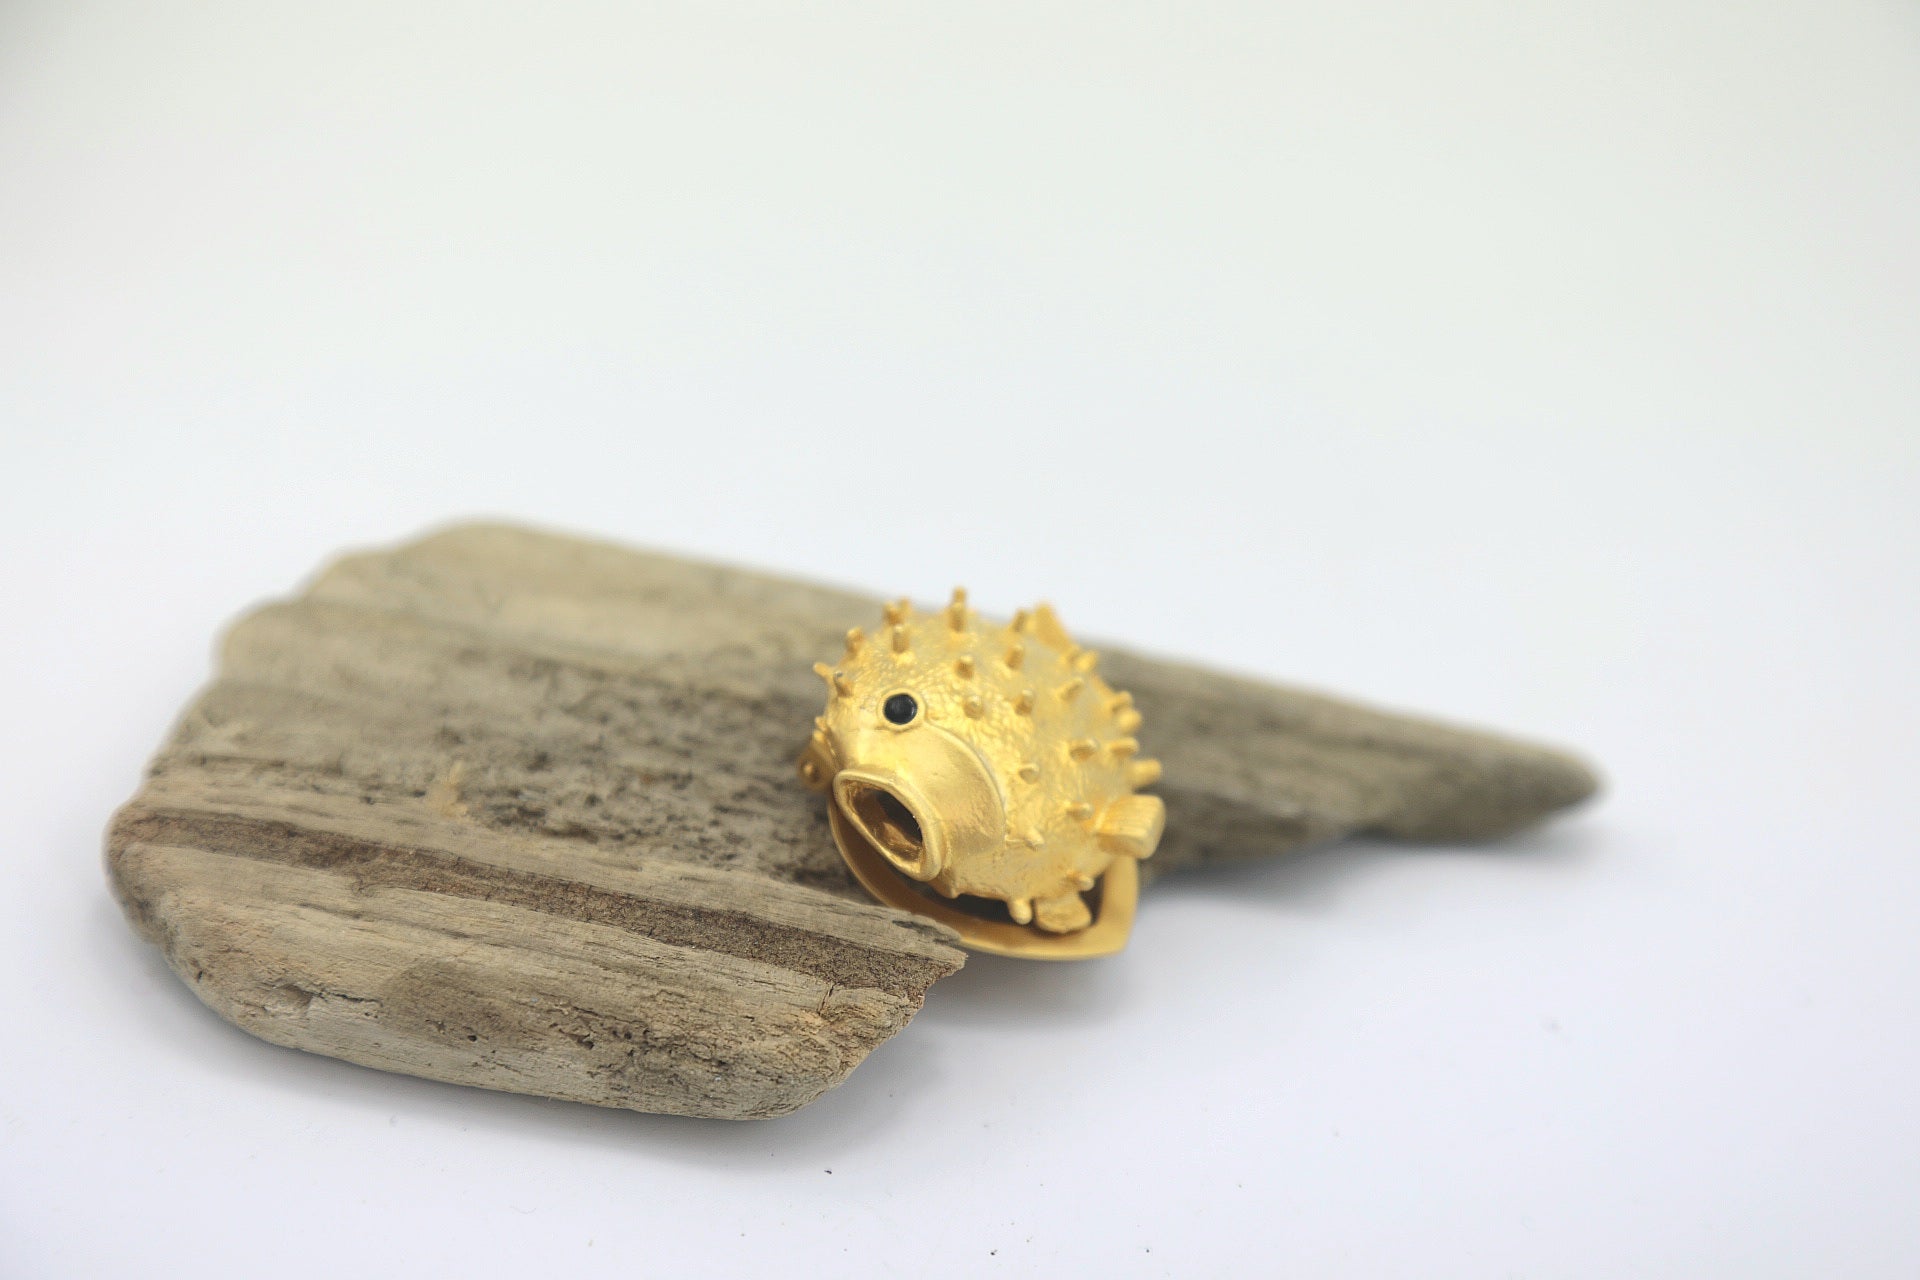 1960s Dress Clip - Vintage Novelty Puffer Fish - Gold Tone